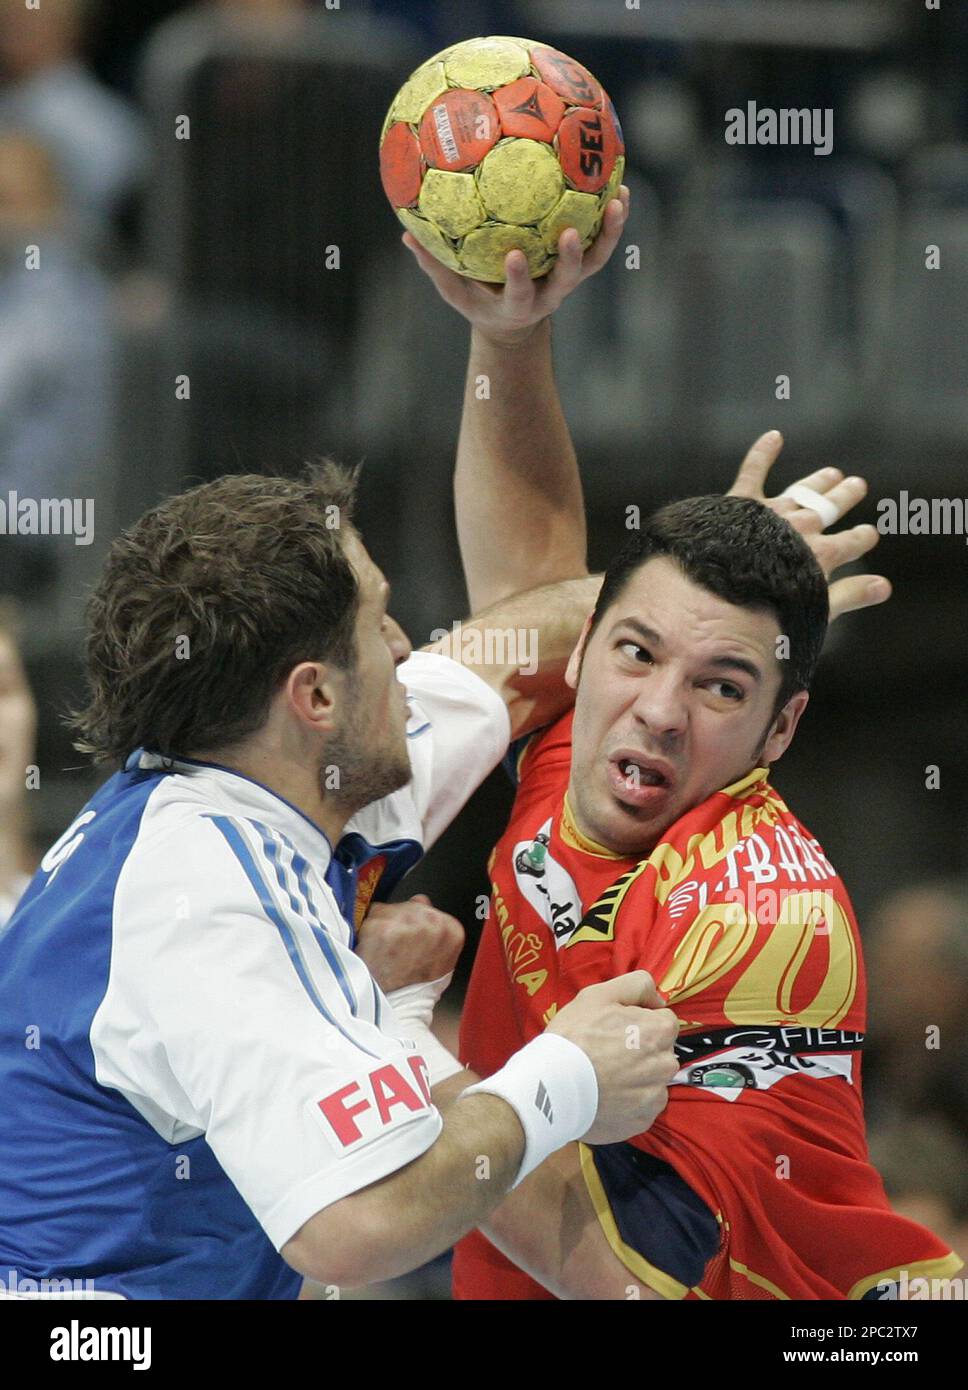 Spains Jose Maria Vaquero, right, and Russias Konstantin Igropulo fight for the ball during a Handball World Championhip main round Group M2 match between Spain and Russia in the SAP Arena in